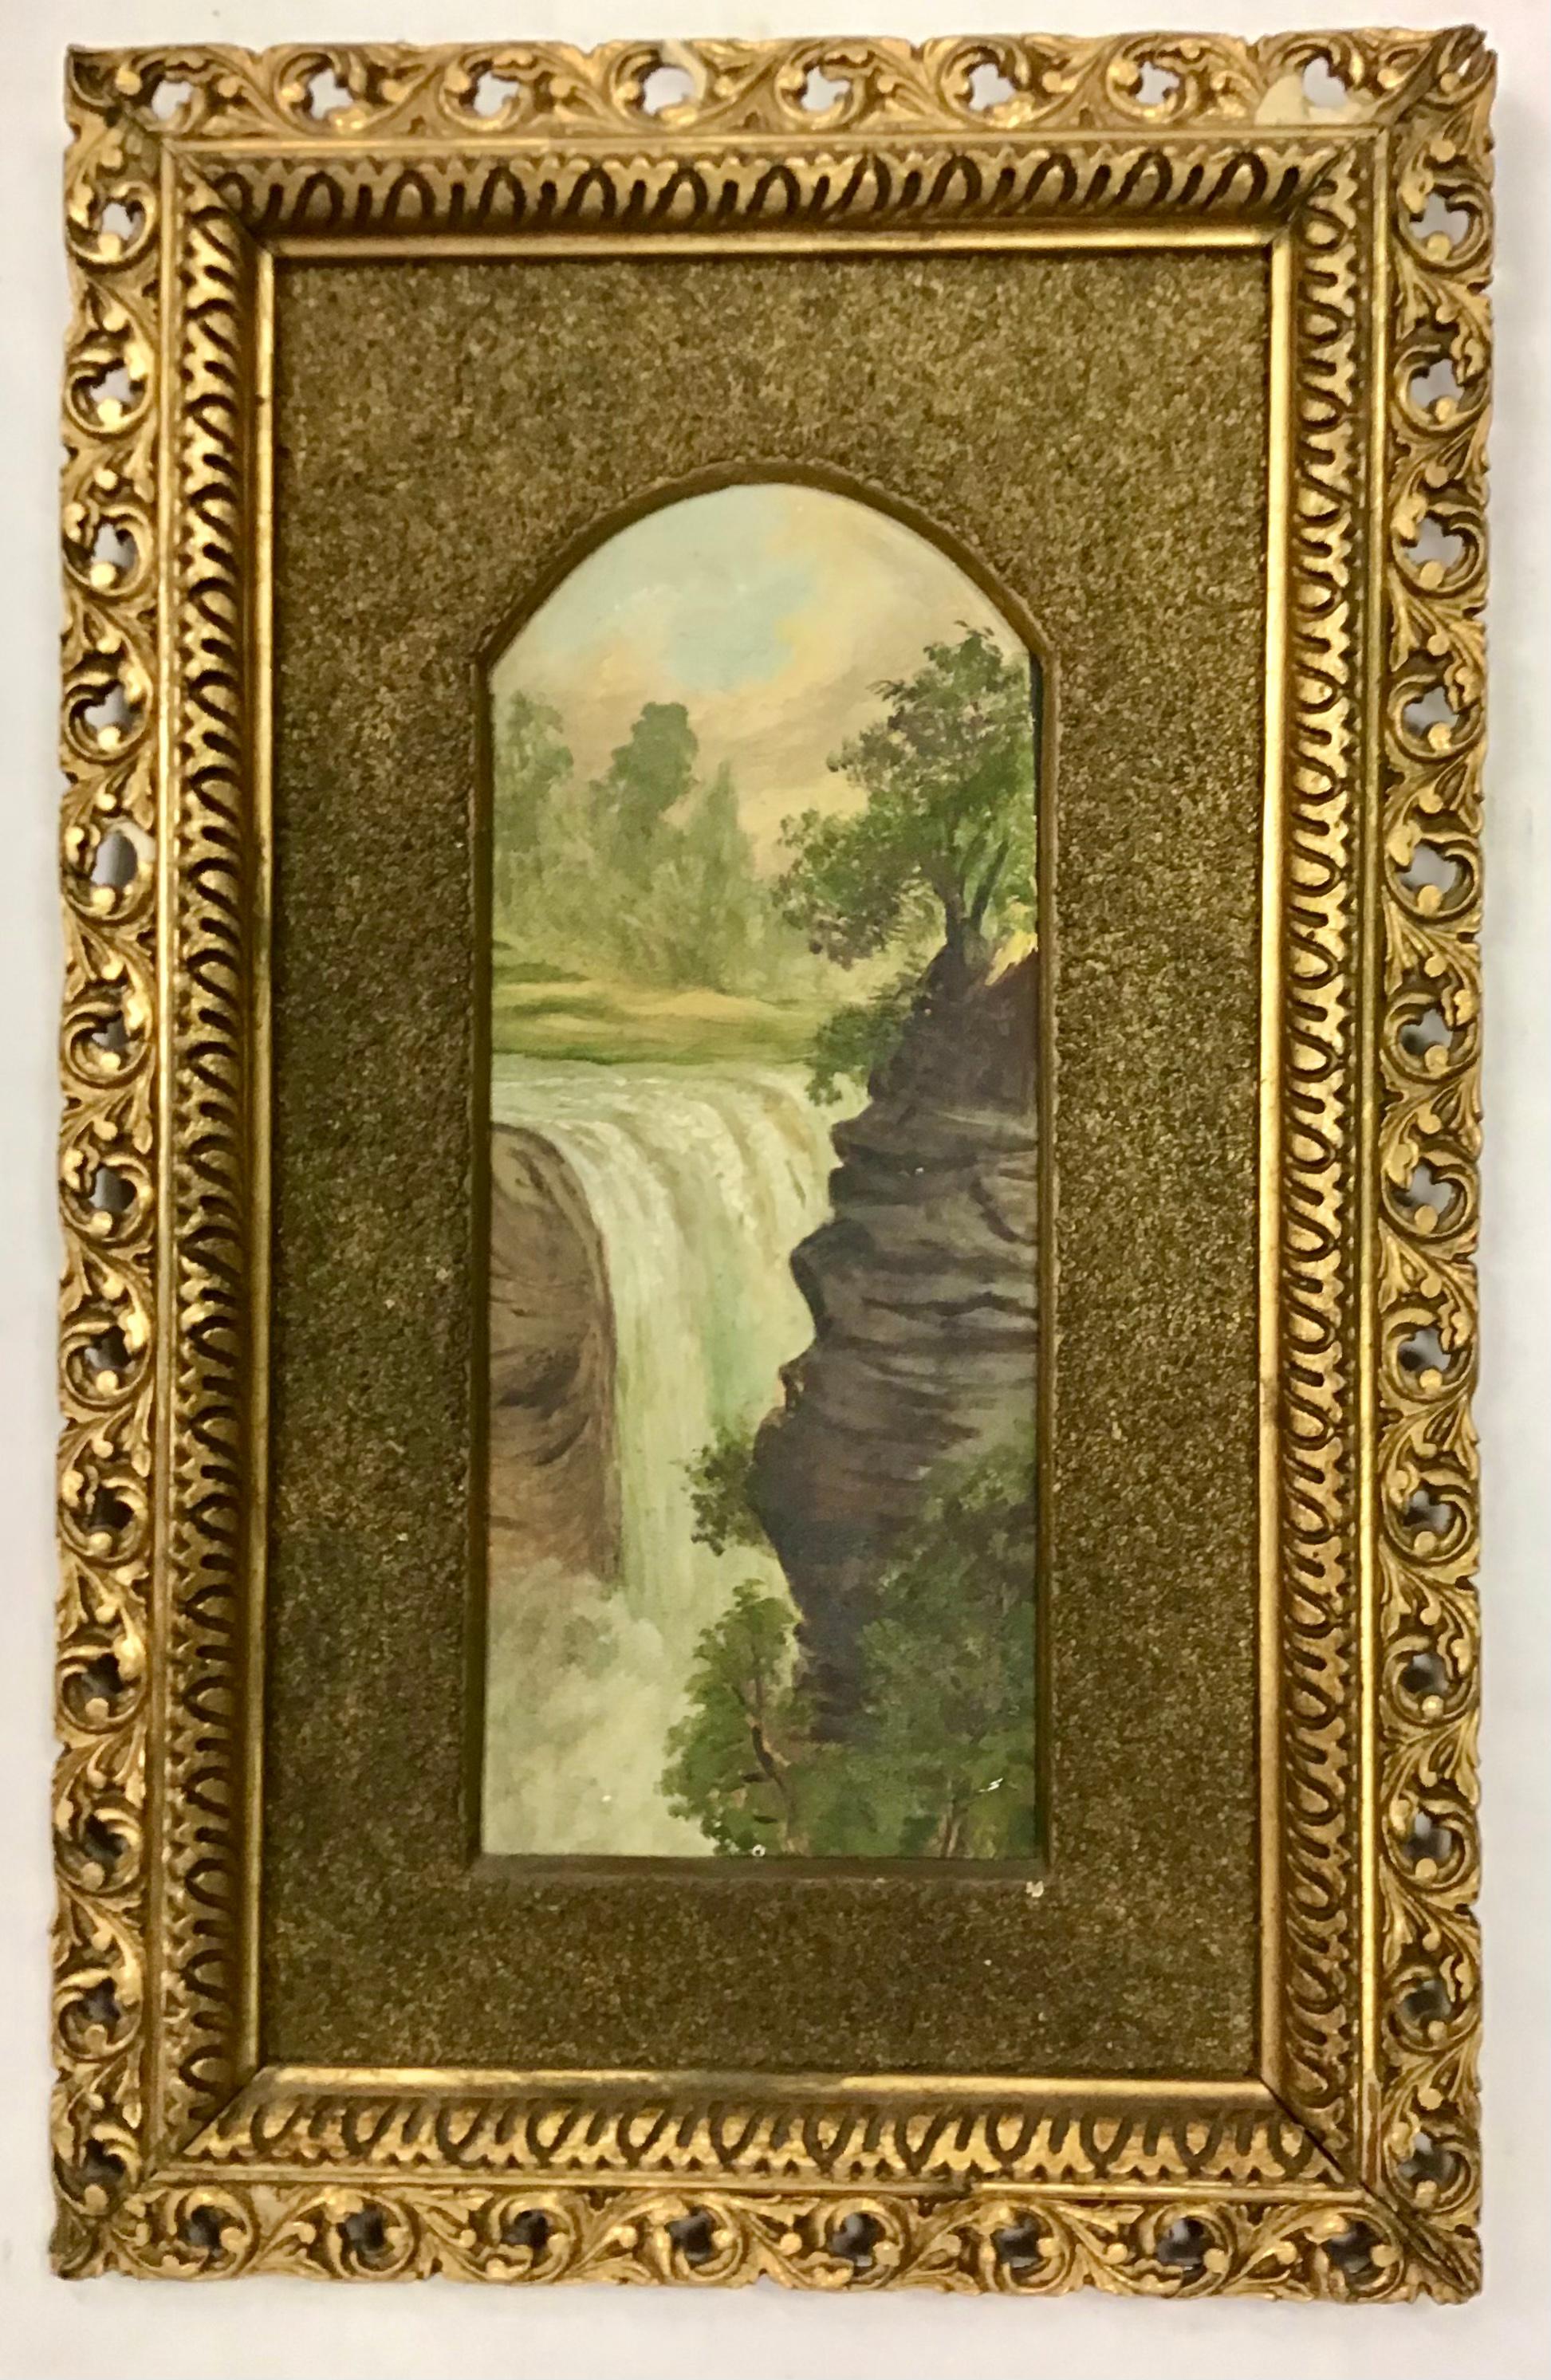 Pair of antique small Italian oil paintings depicting a waterfall and river. Both are displayed in an arched textured matting within a giltwood frame.